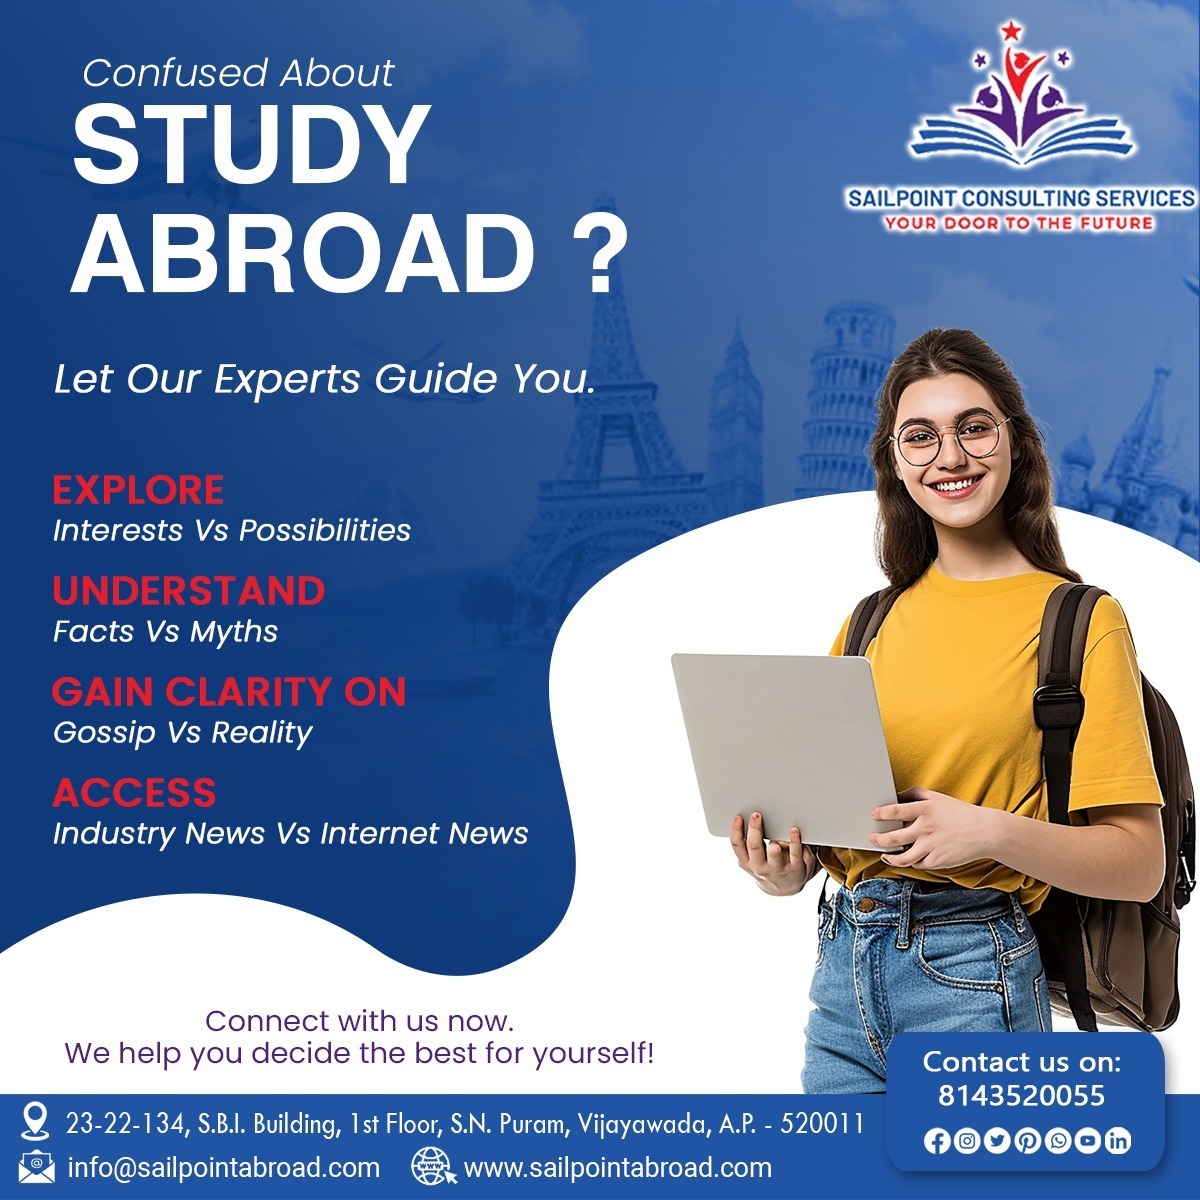 Confused About STUDY ABROAD ?

#abroadstudies #sailpointconsultancy #sailpointconsultingservices #education #educationispower #abroad #studymotivation #consultingservices #studymotivation #study #abroadstudiesconsultants #abroadstudiesconsultancy #abroad #consultancy